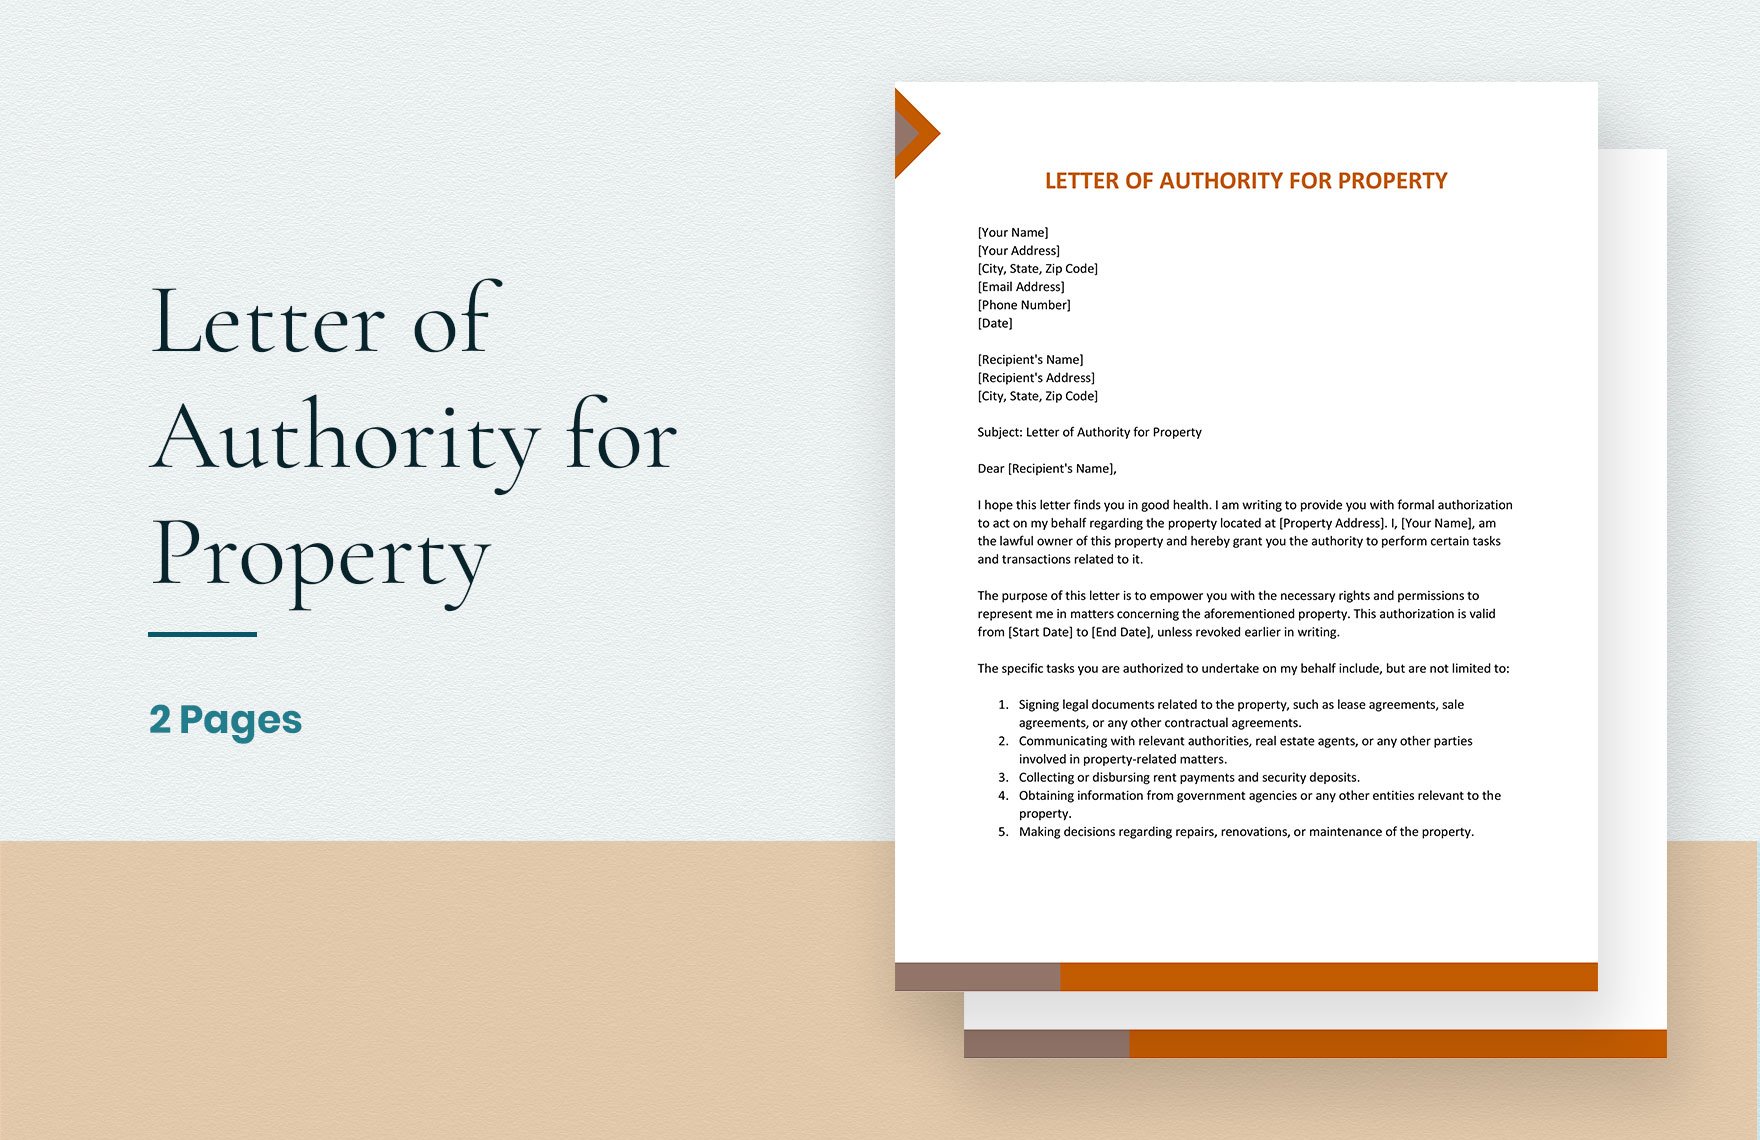 Letter of Authority for Property